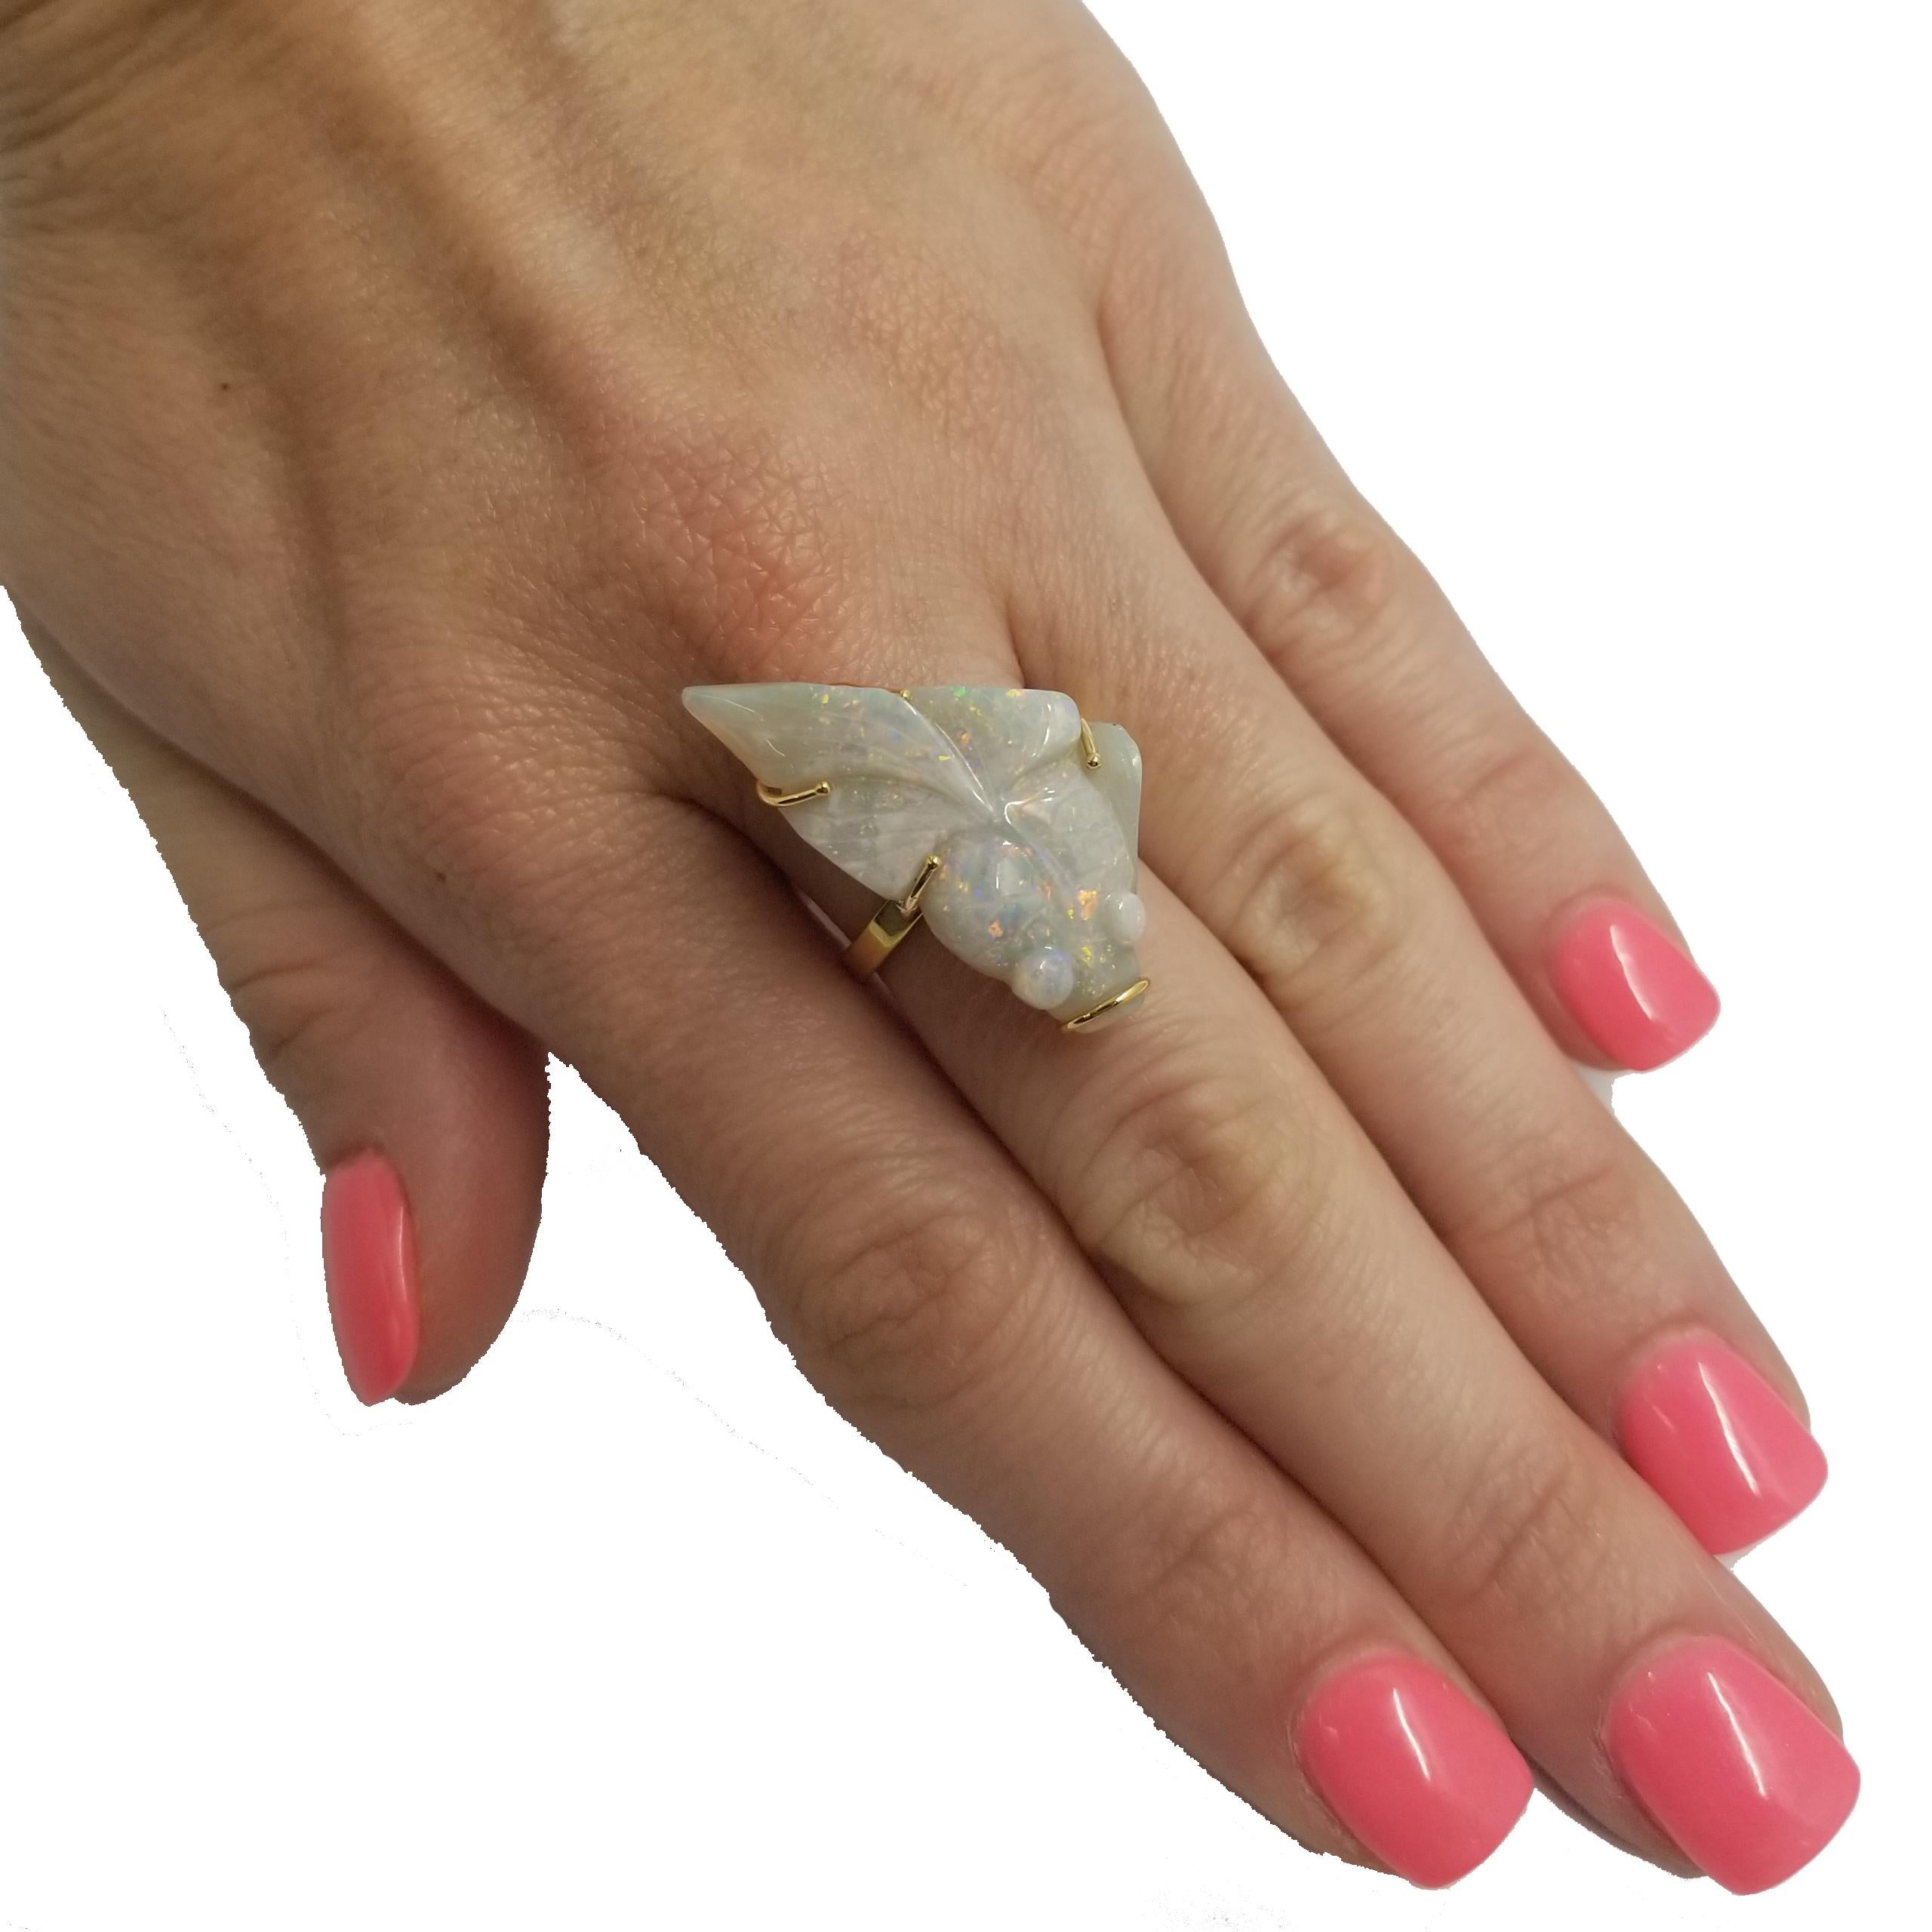 Handmade one-of-a-kind 14 karat yellow gold ring featuring an opal fish carving. The opal weighs 12.77 carats and has gorgeous play-of-color including red, pink, green, and blue. The carving is held by 4 prongs and a loop with open gallery